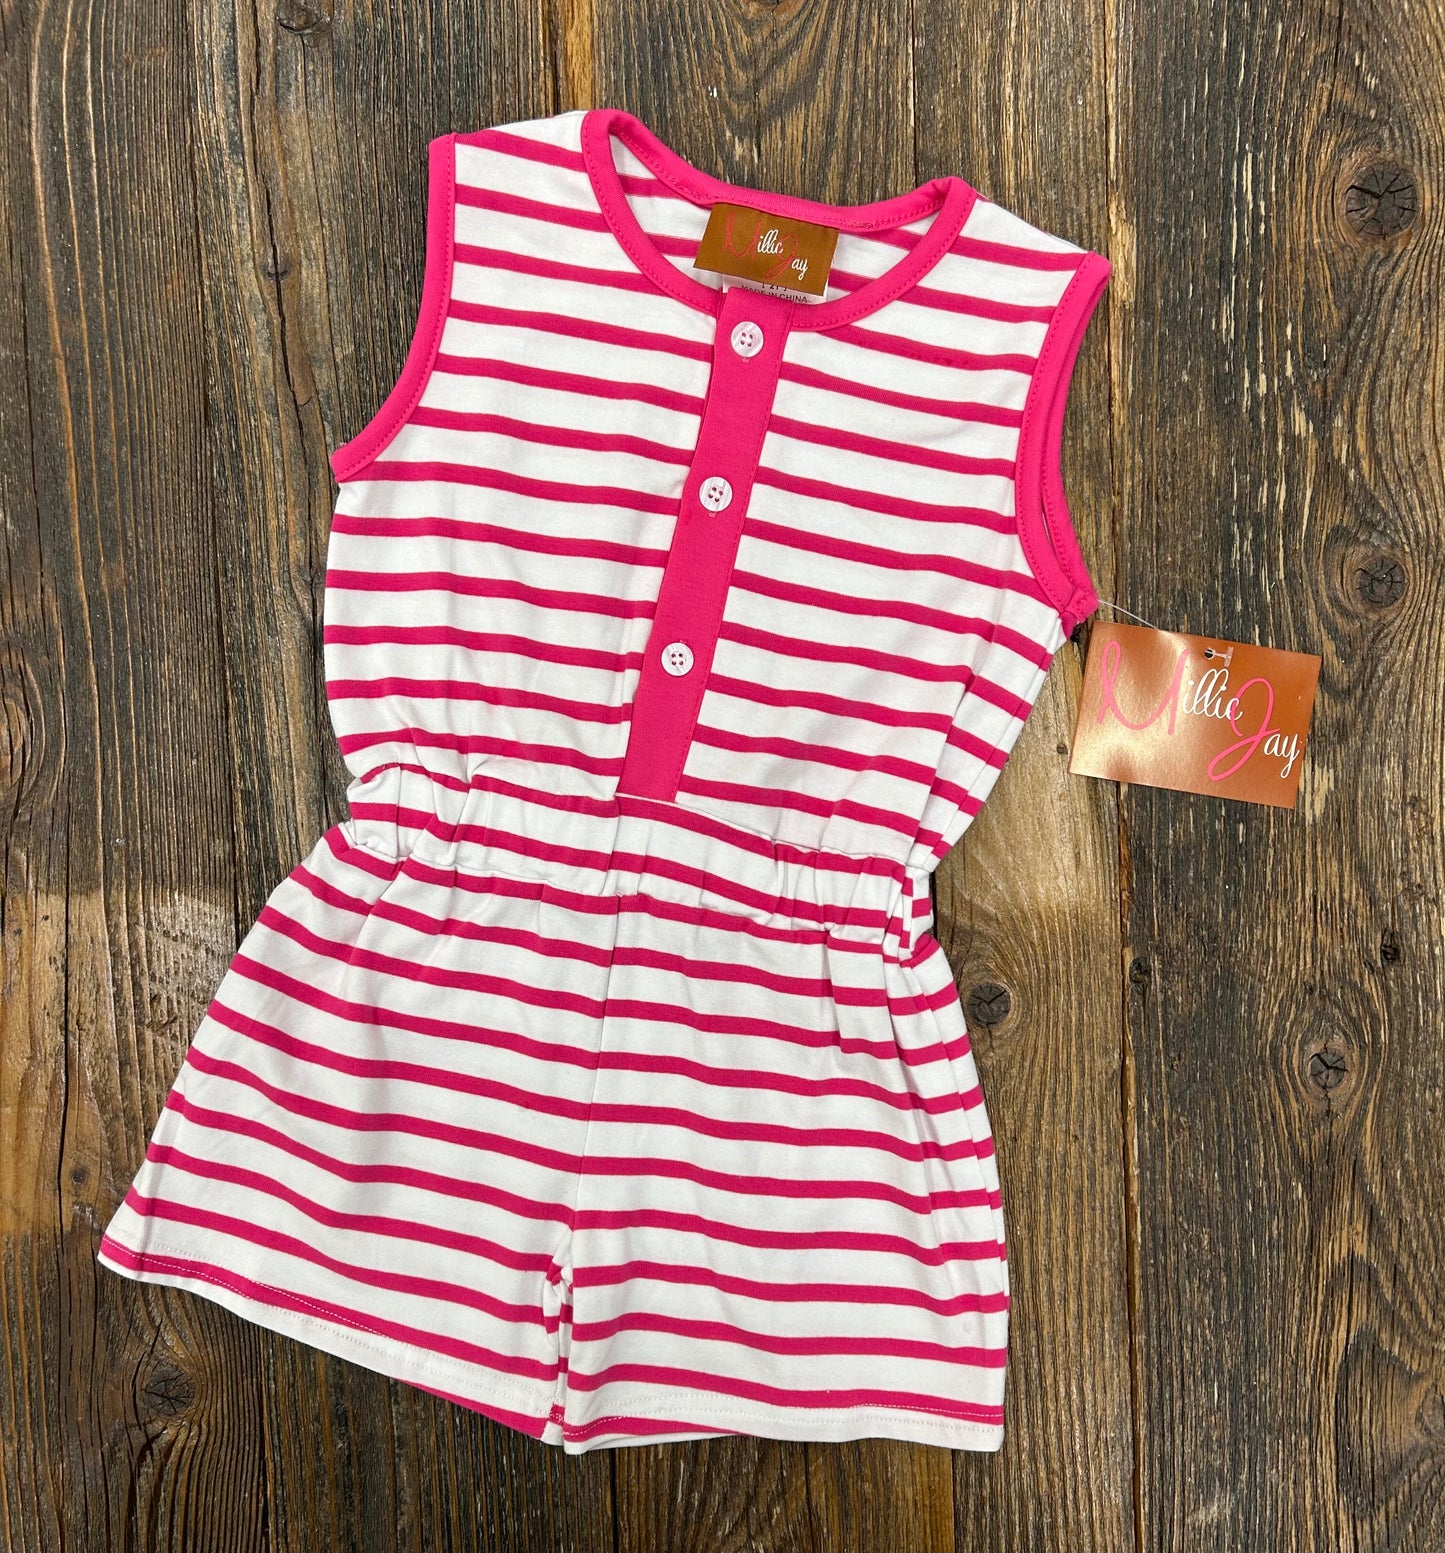 Millie Jay Lily Romper